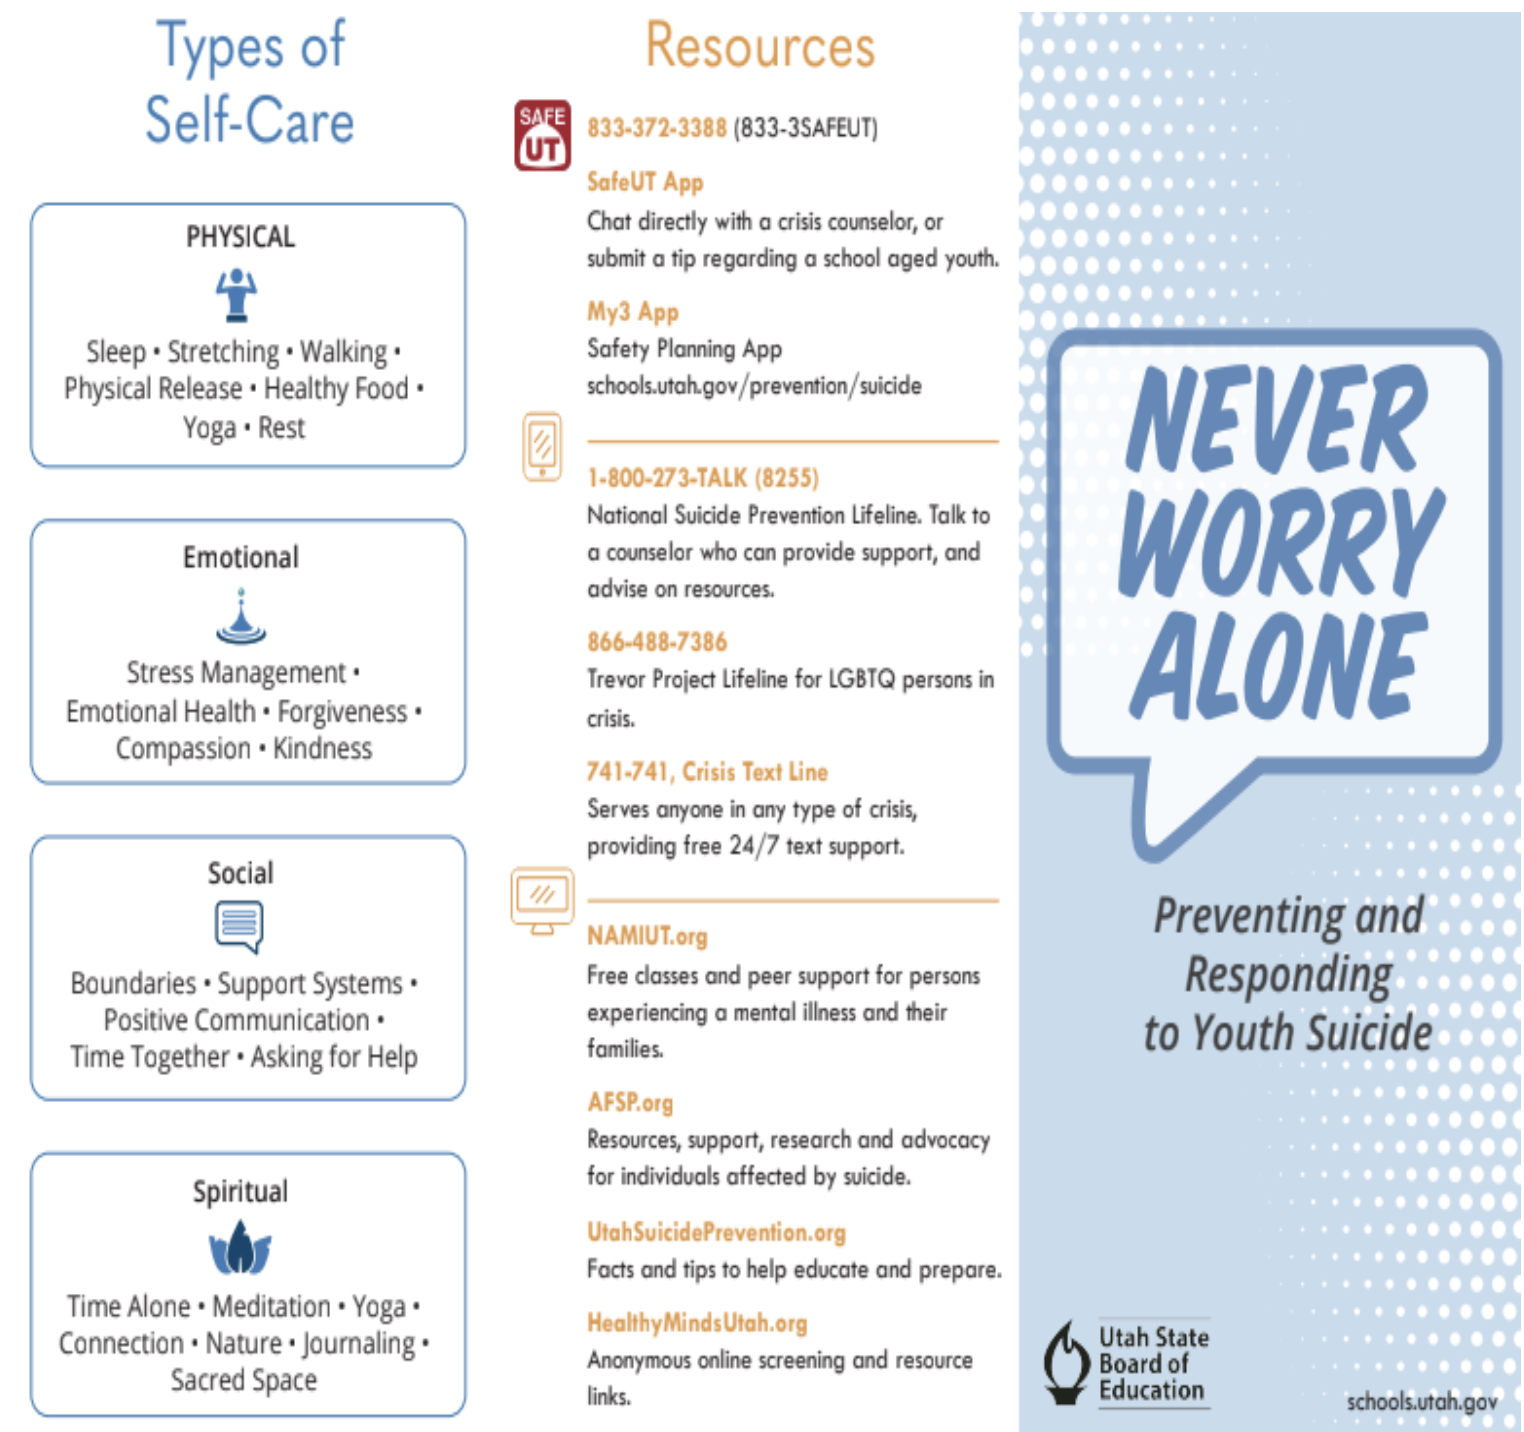 Never Worry Alone, suicide prevention resource